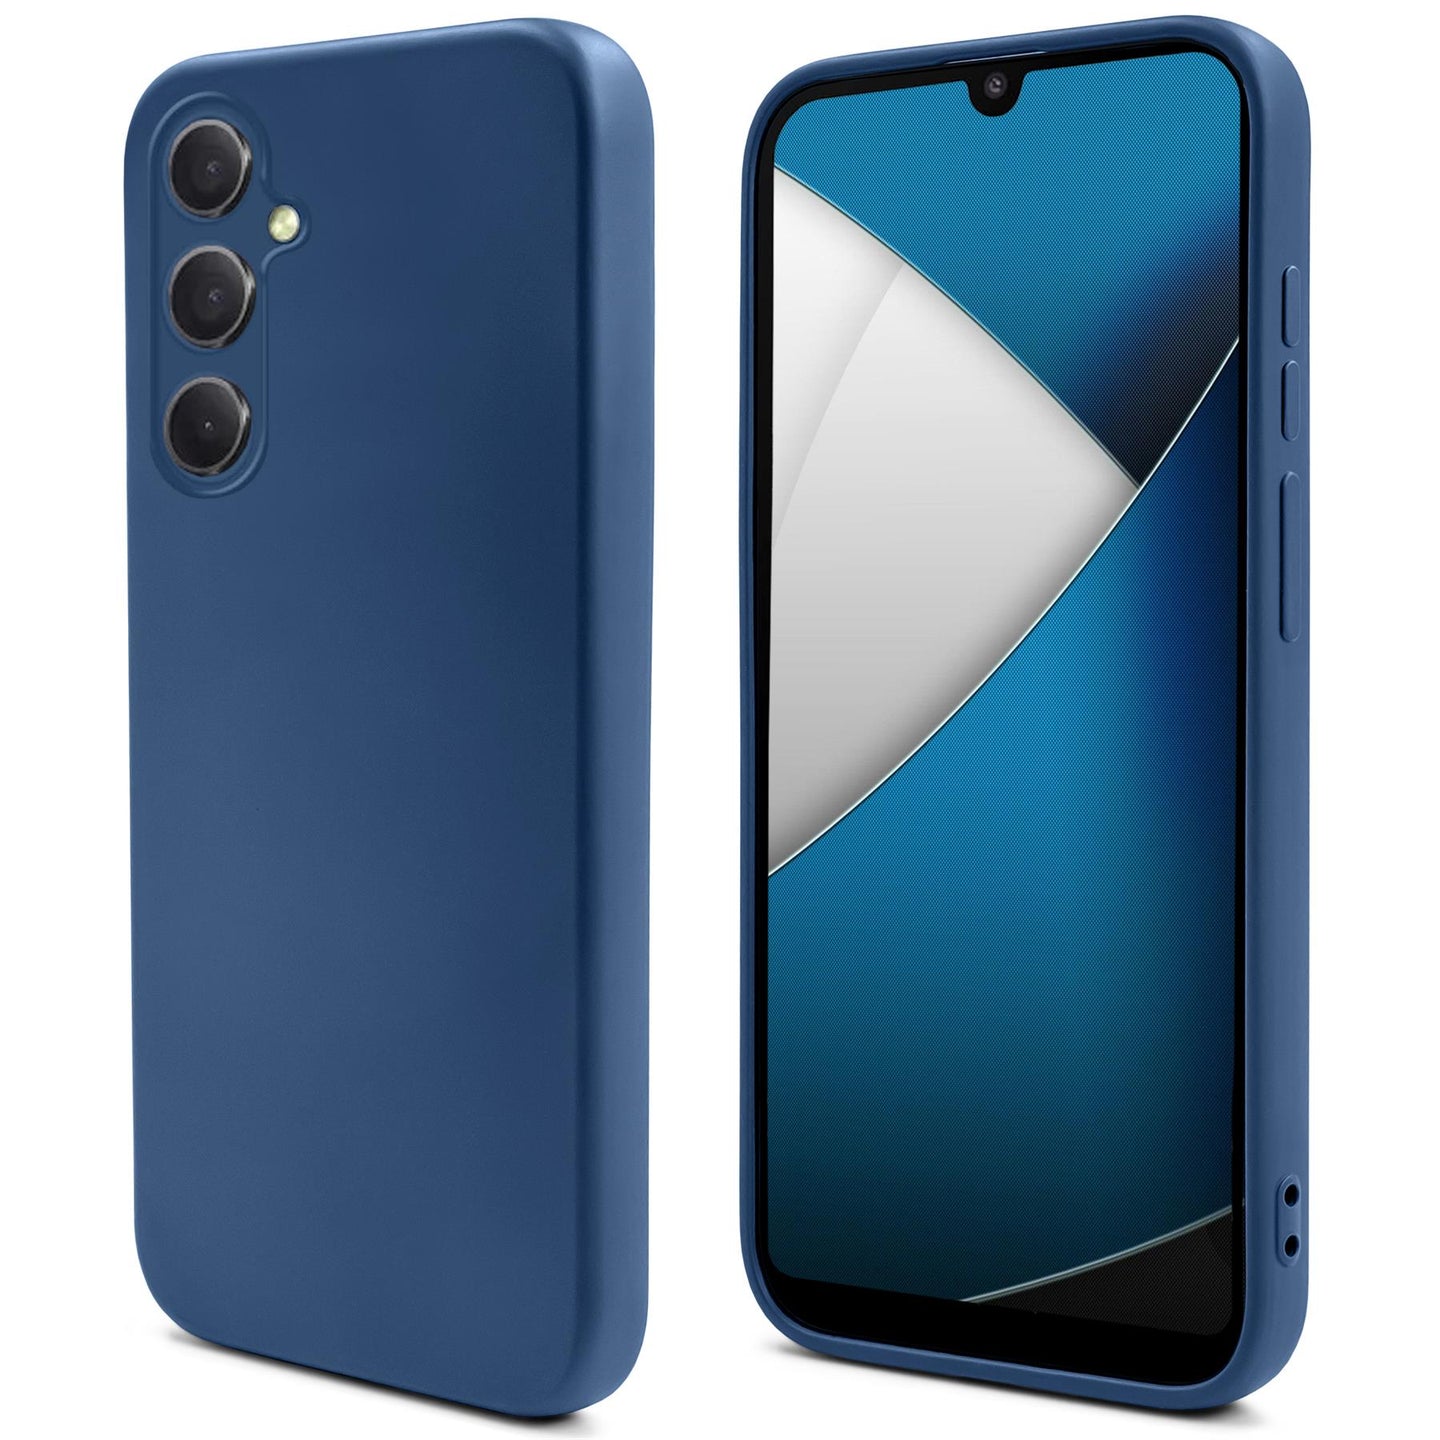 Moozy Lifestyle. Silicone Case for Samsung A34 5G, Midnight Blue - Liquid Silicone Lightweight Cover with Matte Finish and Soft Microfiber Lining, Premium Silicone Case